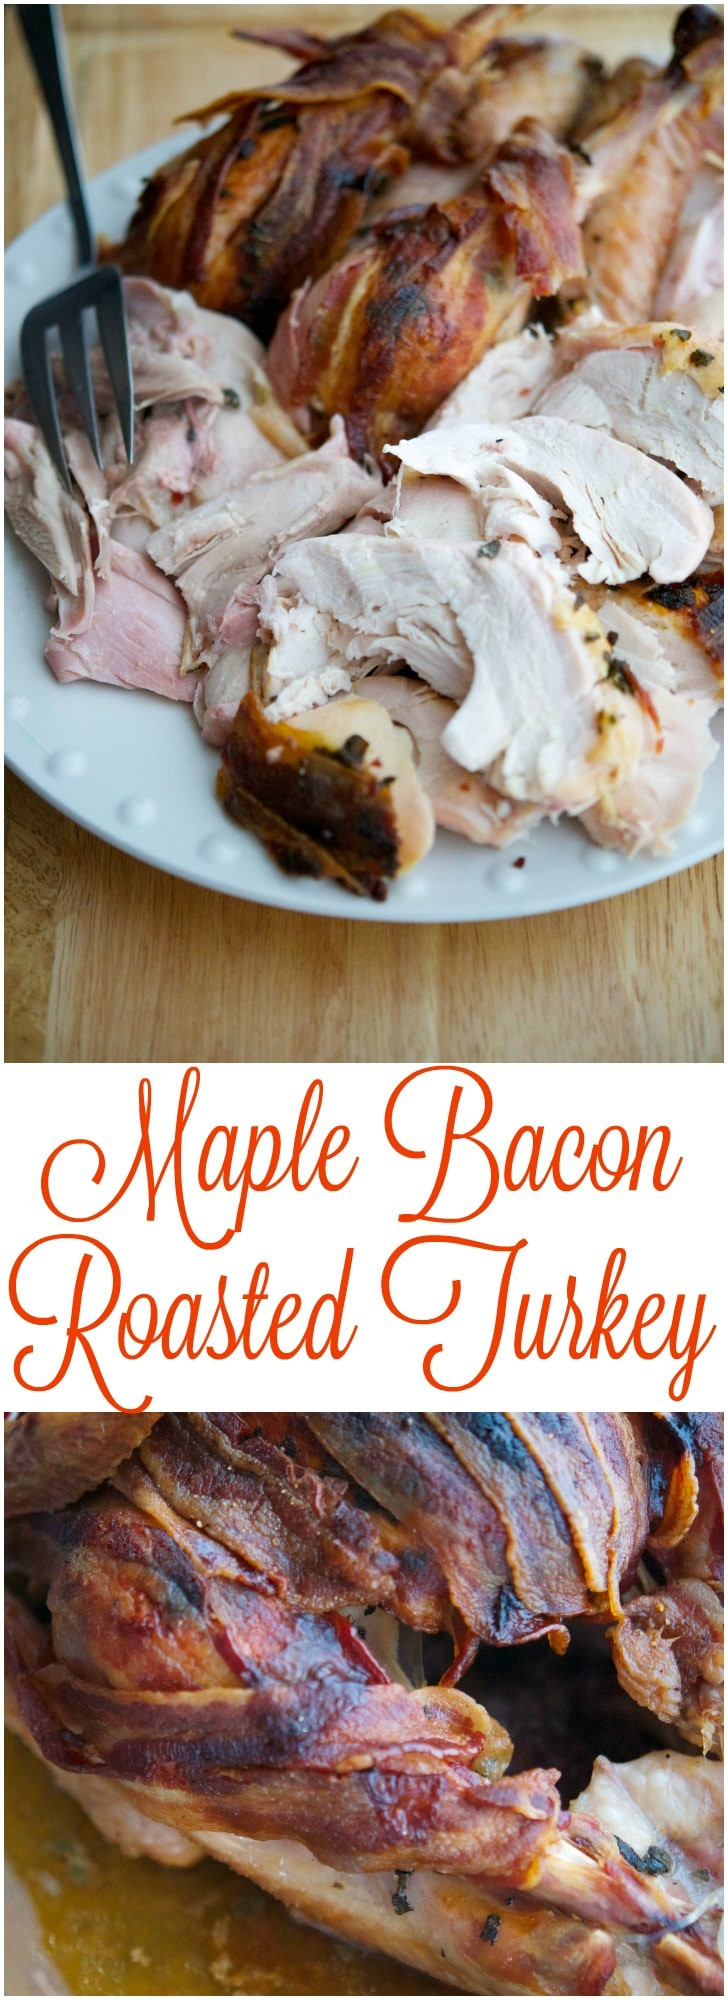 The Best Ideas for Thanksgiving Turkey with Bacon – Best Diet and ...